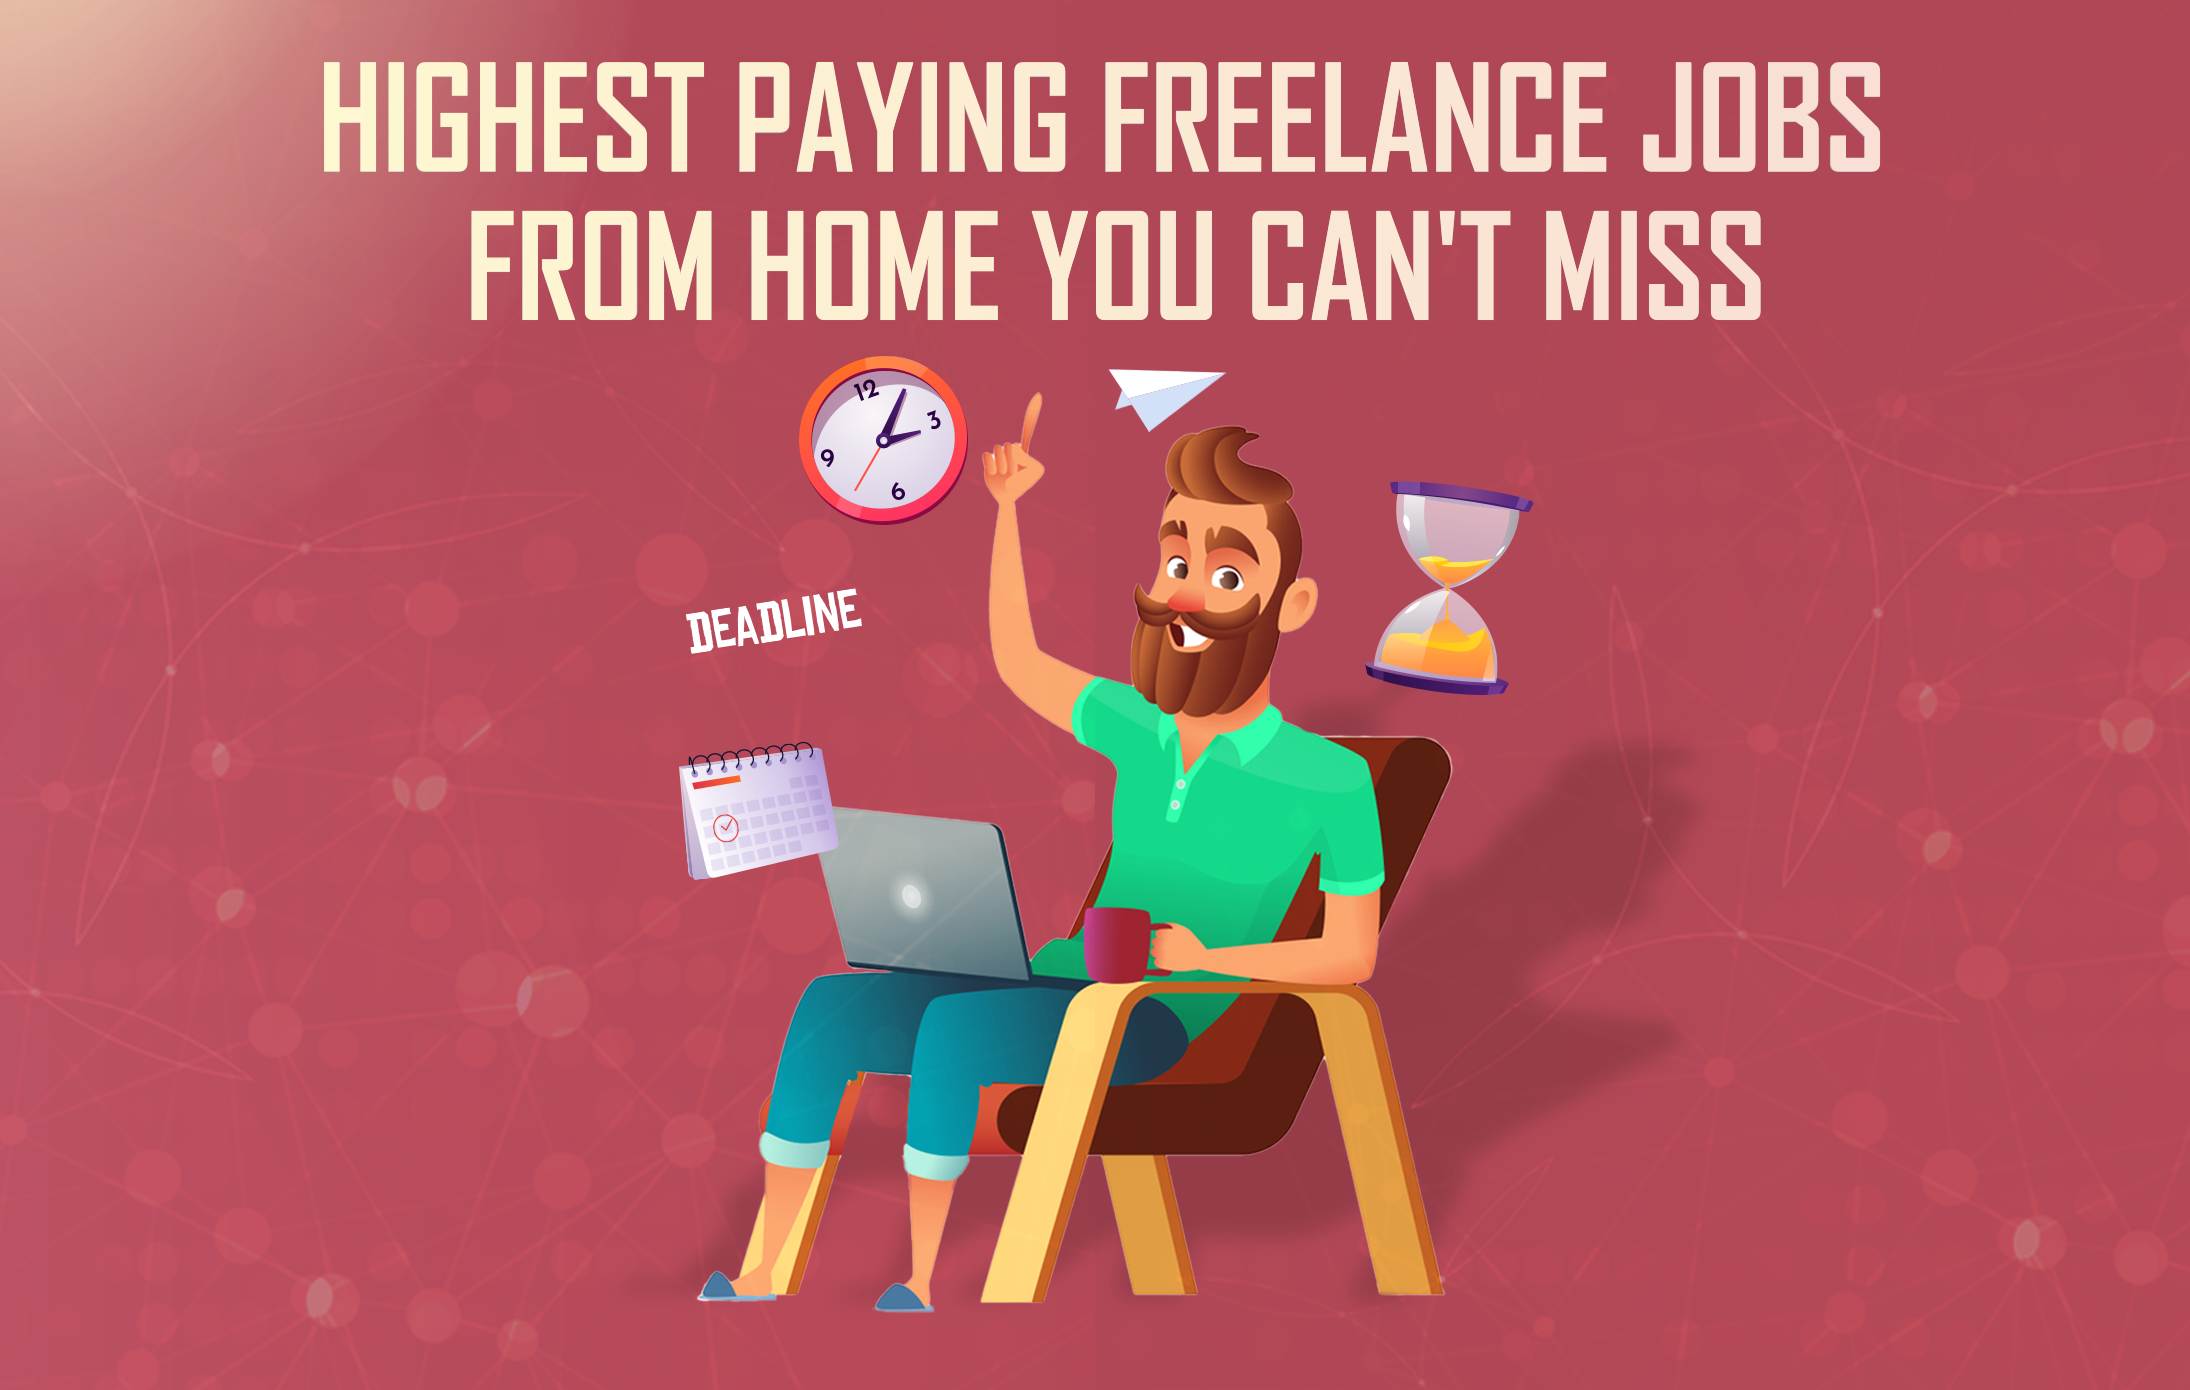 Freelance jobs from home